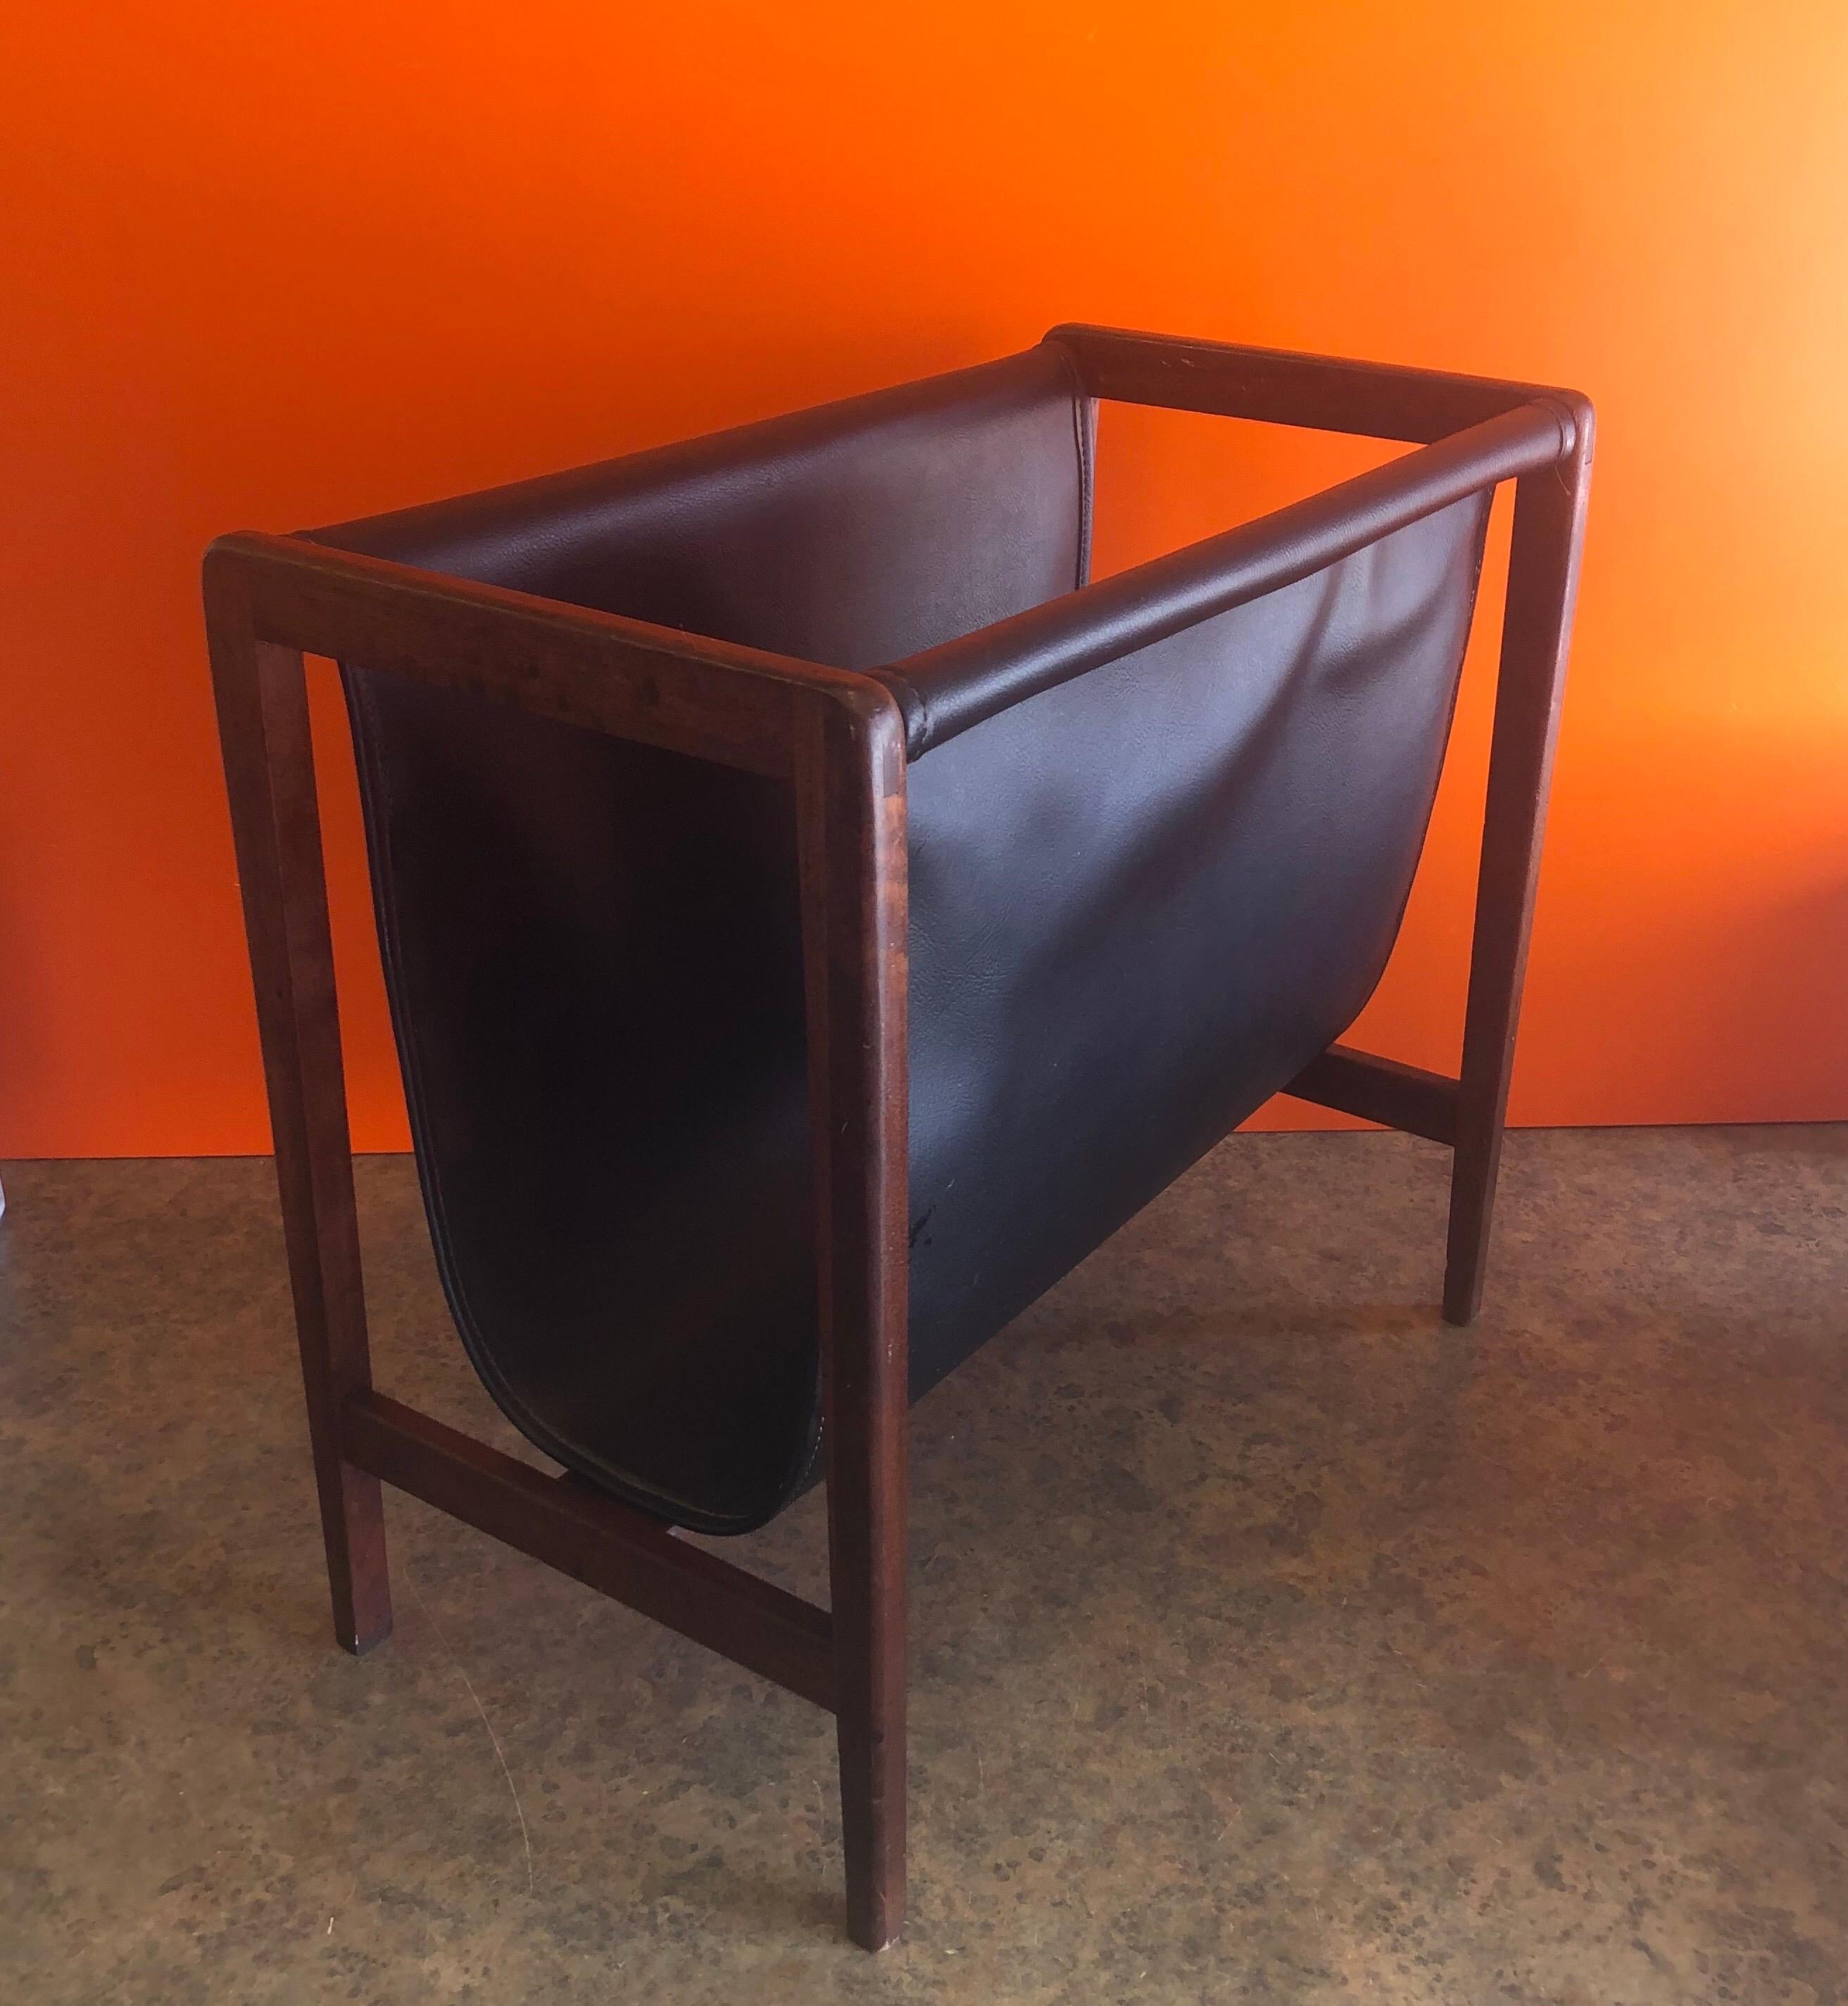 Mid-Century Modern walnut and black naughayde magazine rack, circa 1970s. A solid walnut frame and a dark black Naugahyde insert make this a very attractive and functional magazine rack for any MCM room. #1207.